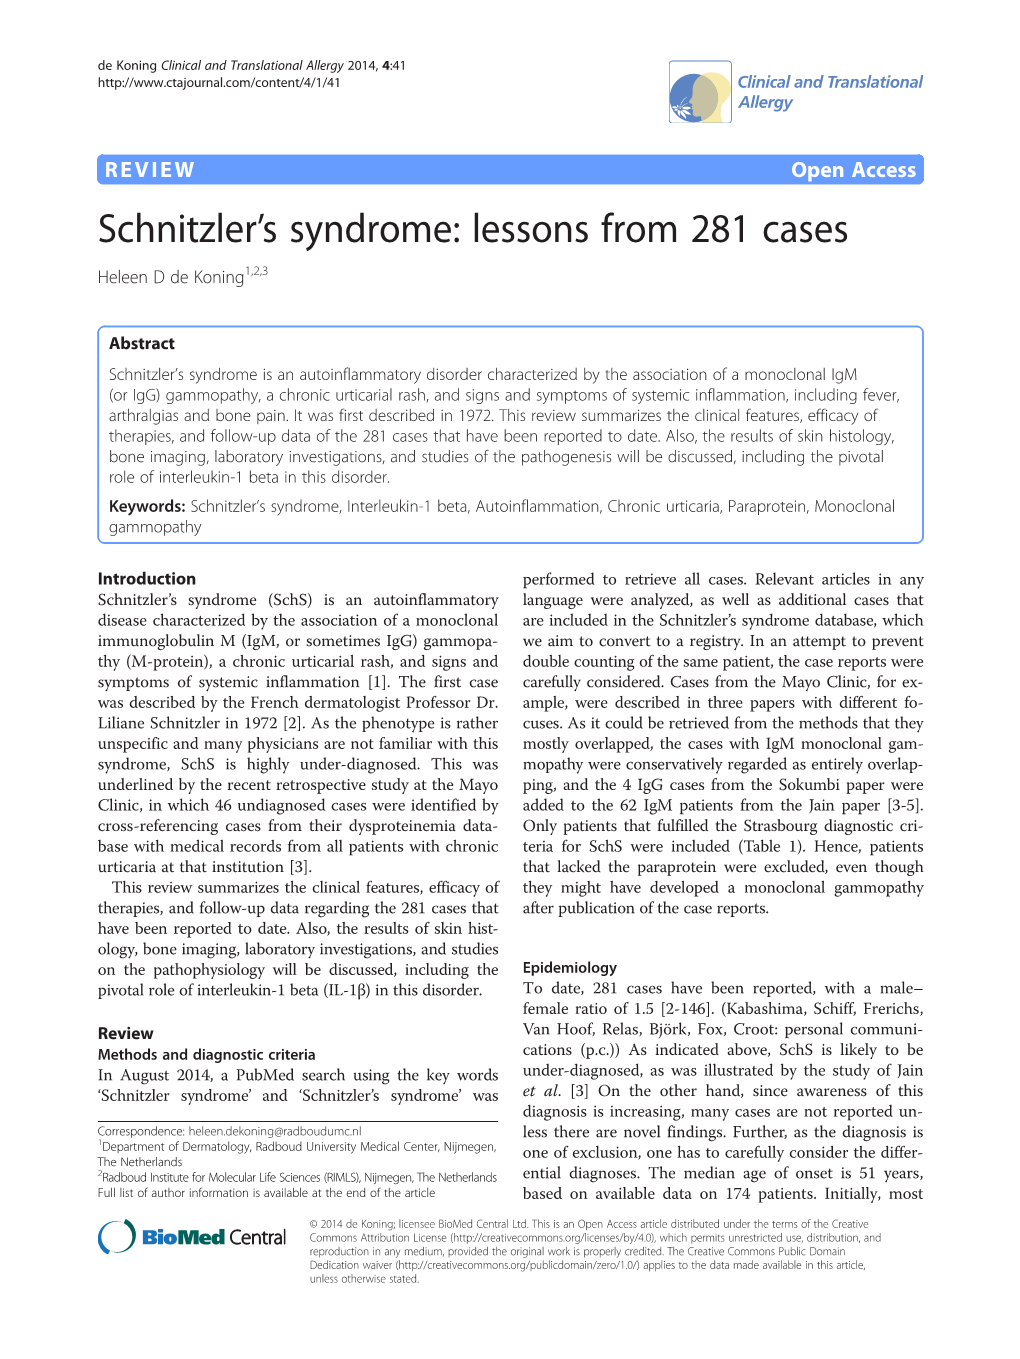 Schnitzler's Syndrome: Lessons from 281 Cases